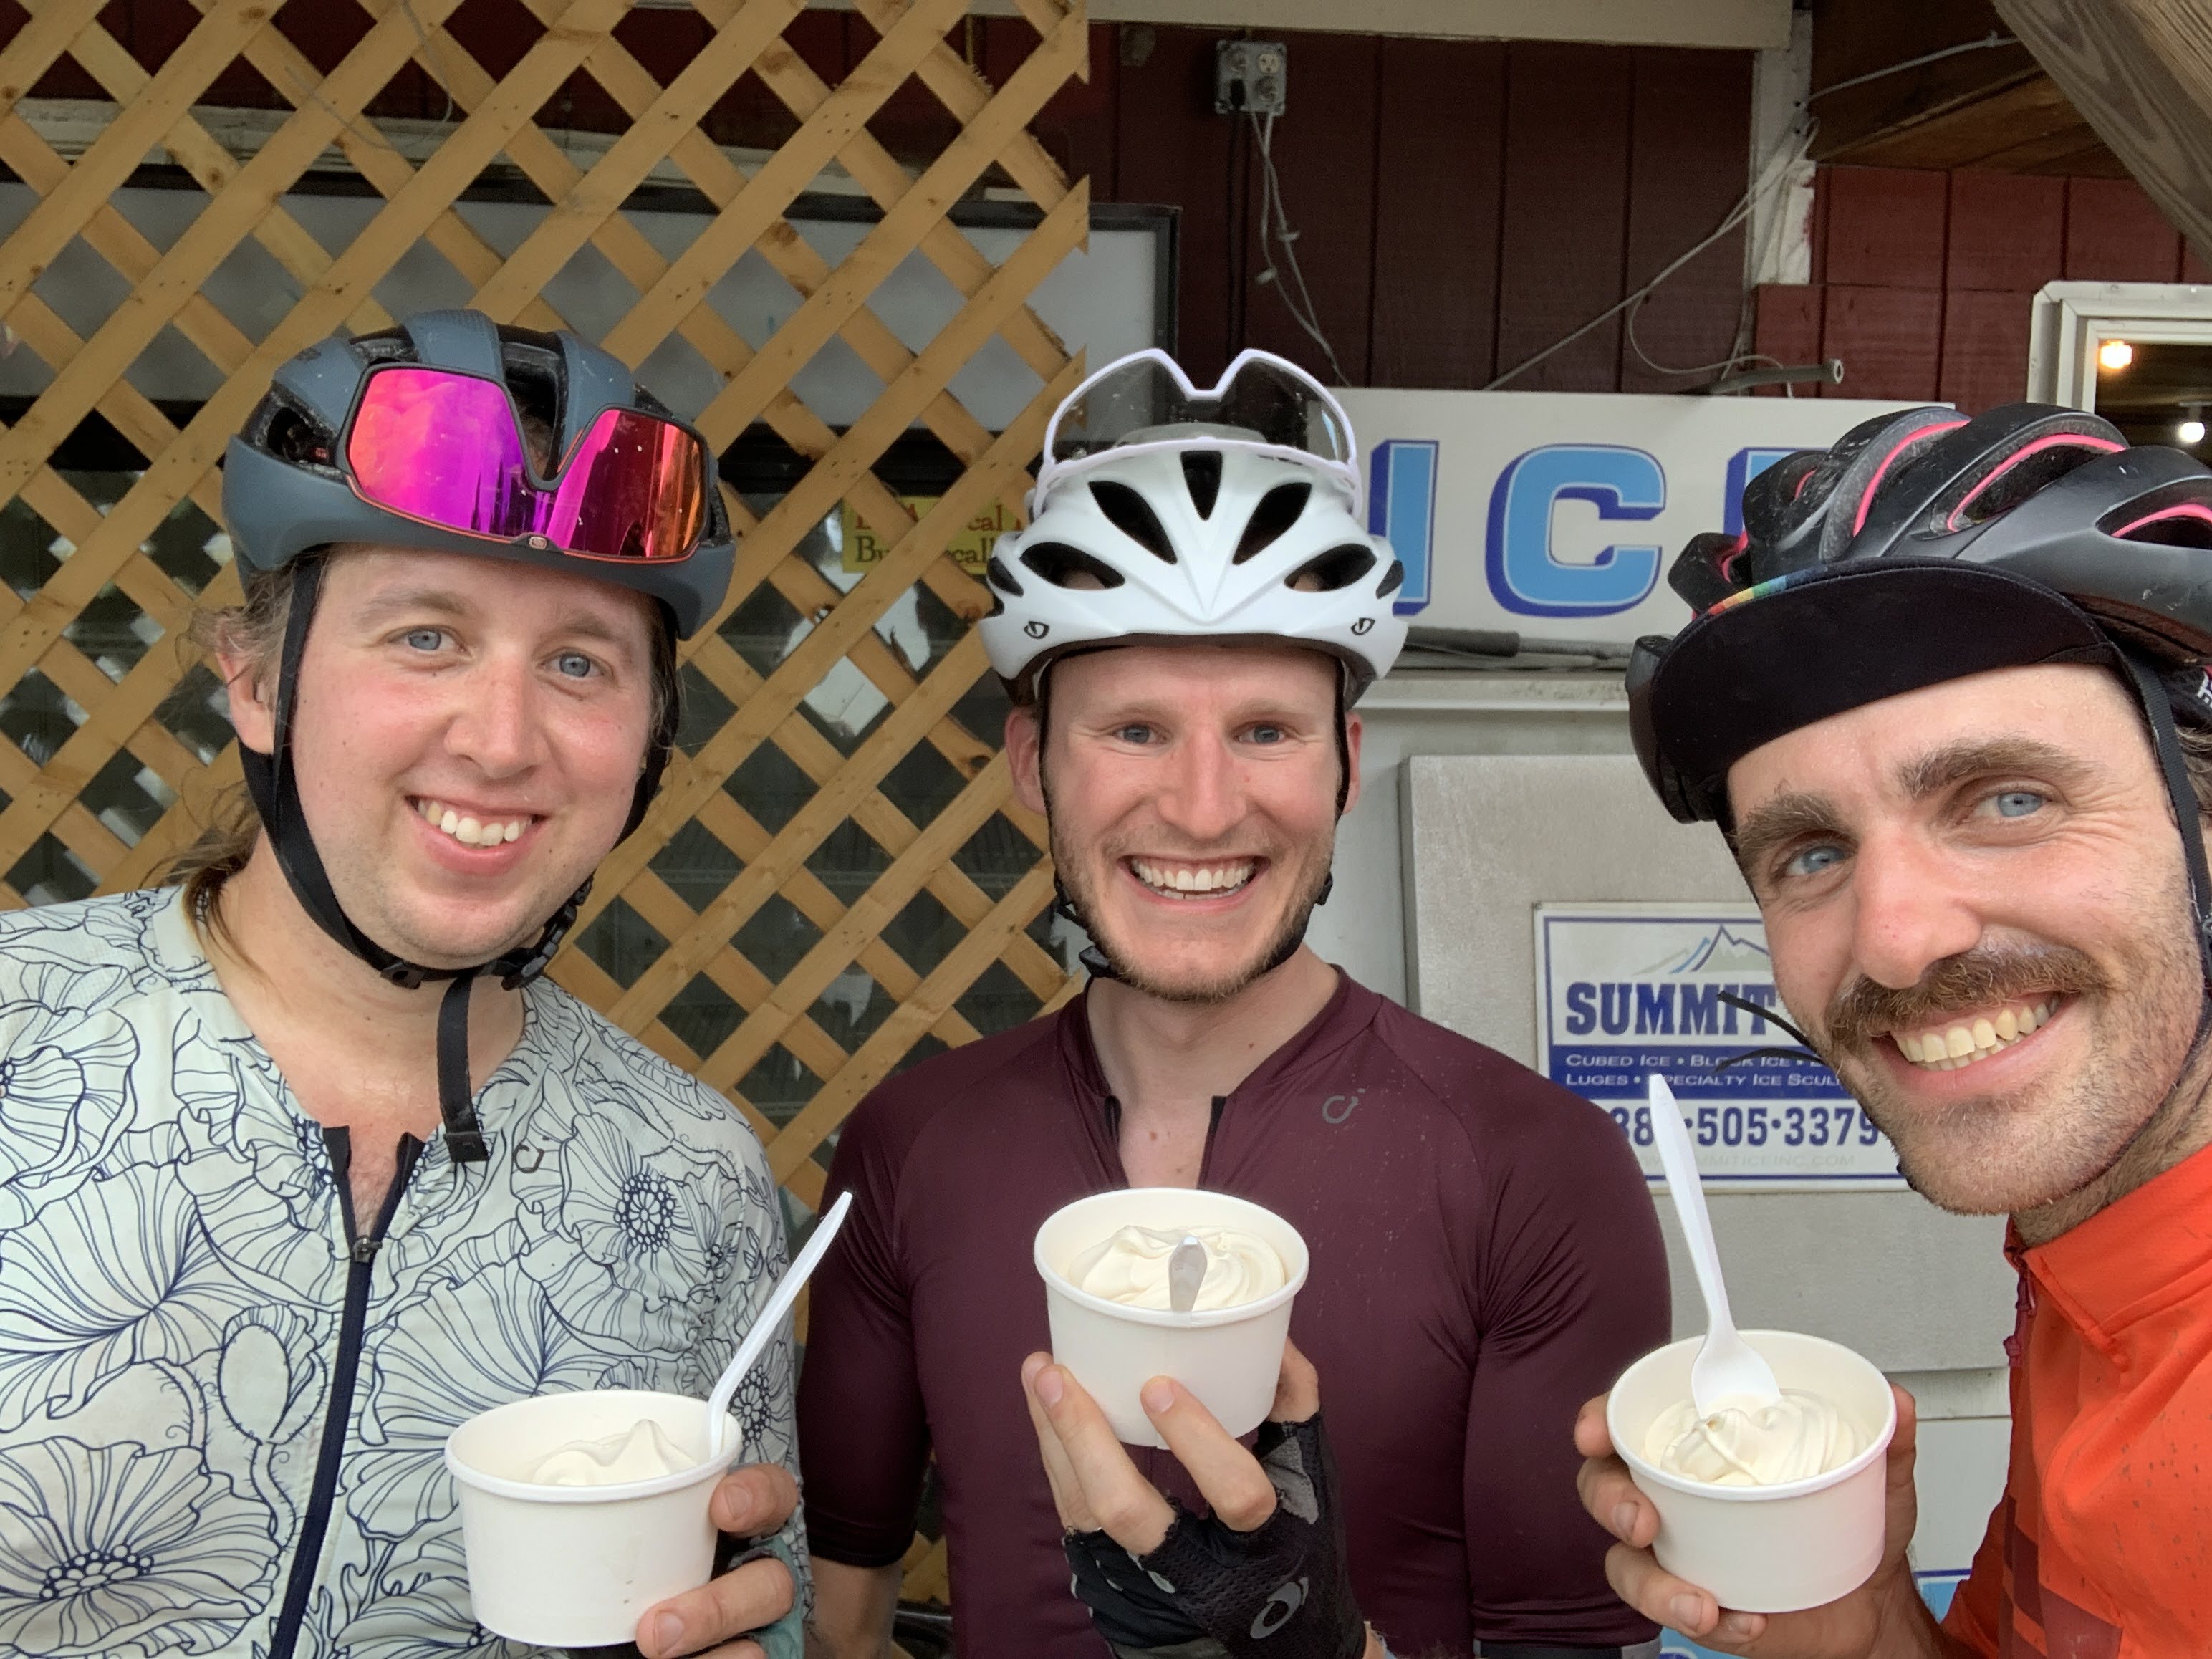 Much needed maple creemee stop during D2R2 in western Mass. Also featuring current interim executive director Jeff Gang!